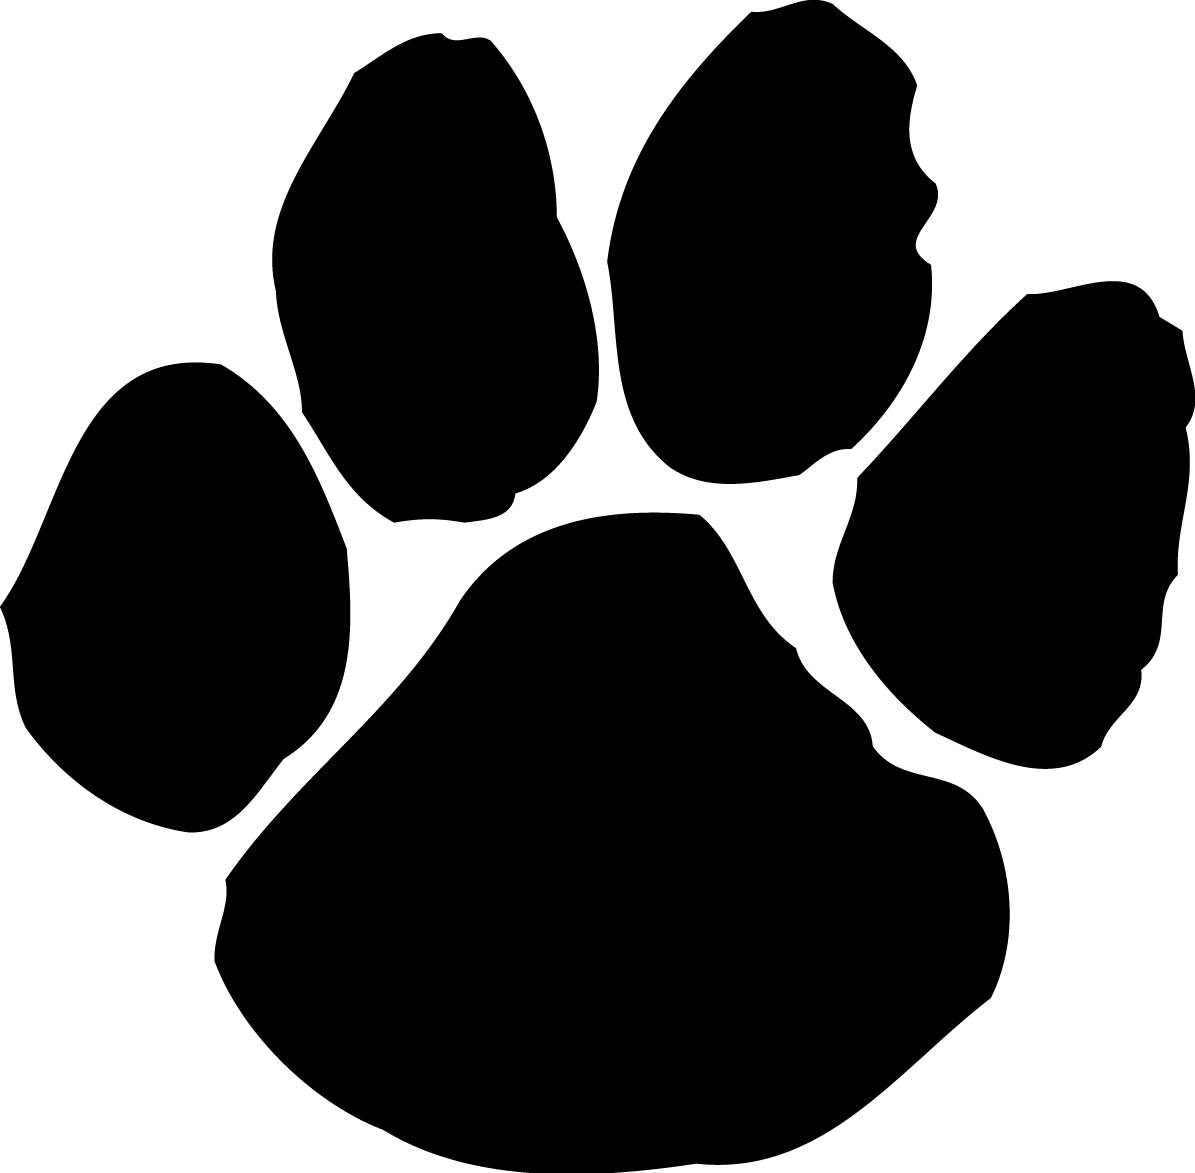 Best Photos of Paw Print Silhouette - Dog Paw Print Silhouette ...